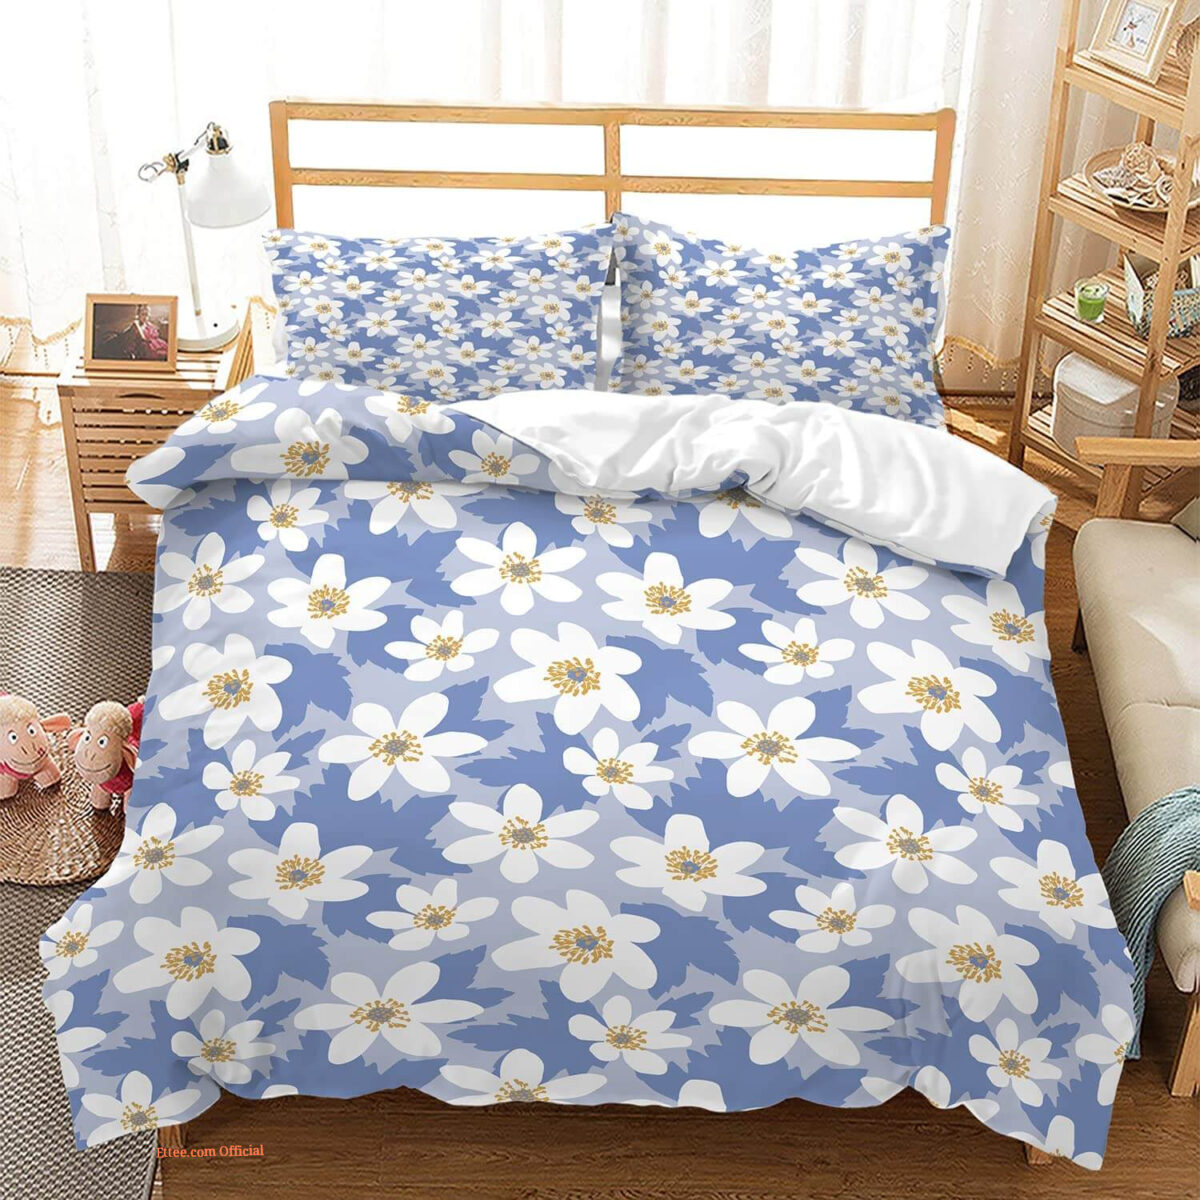 Floral Bedding Full Size Garden Floral Bedding Set. Luxurious Smooth And Durable - King - Ettee